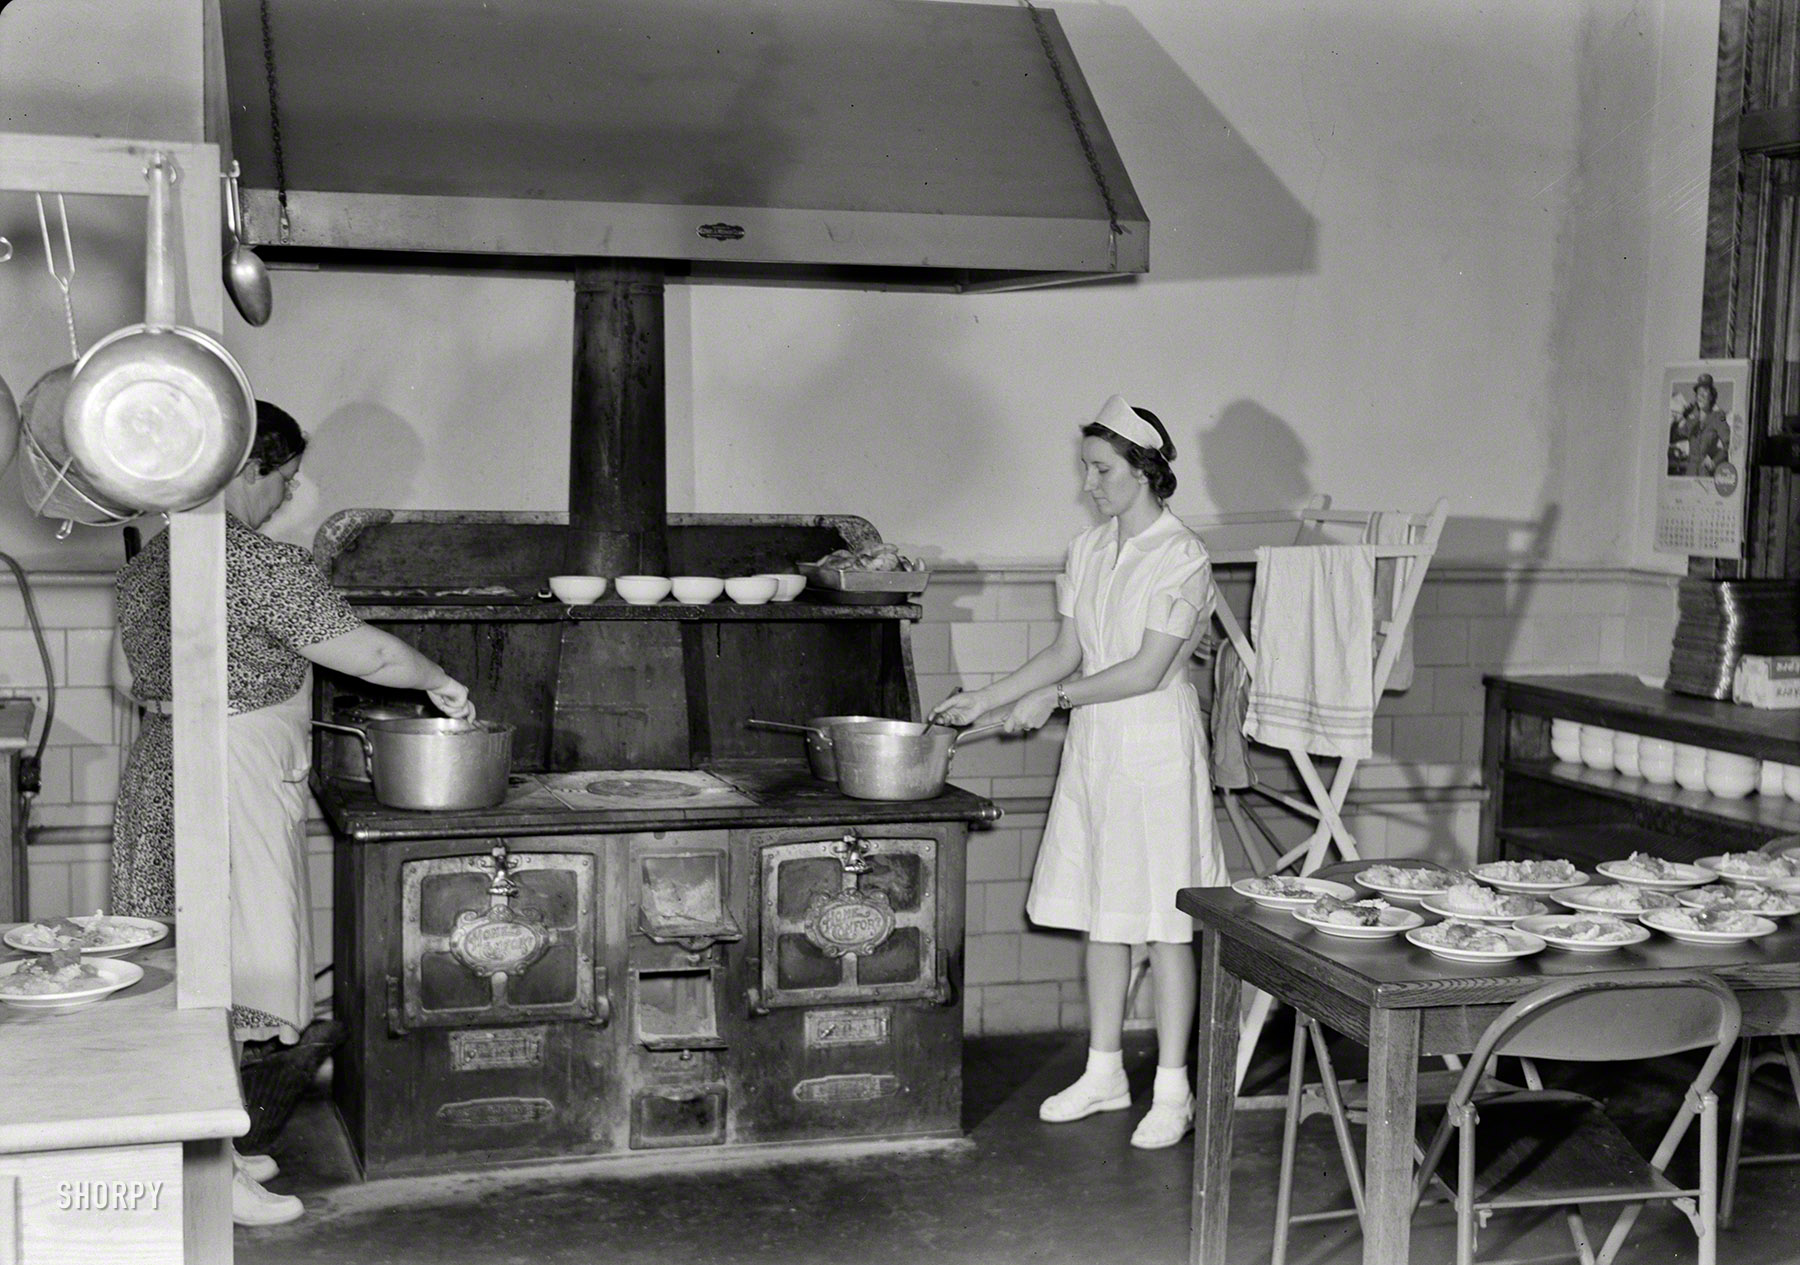 Shorpy Historical Picture Archive :: School Lunch: 1943 high-resolution ...